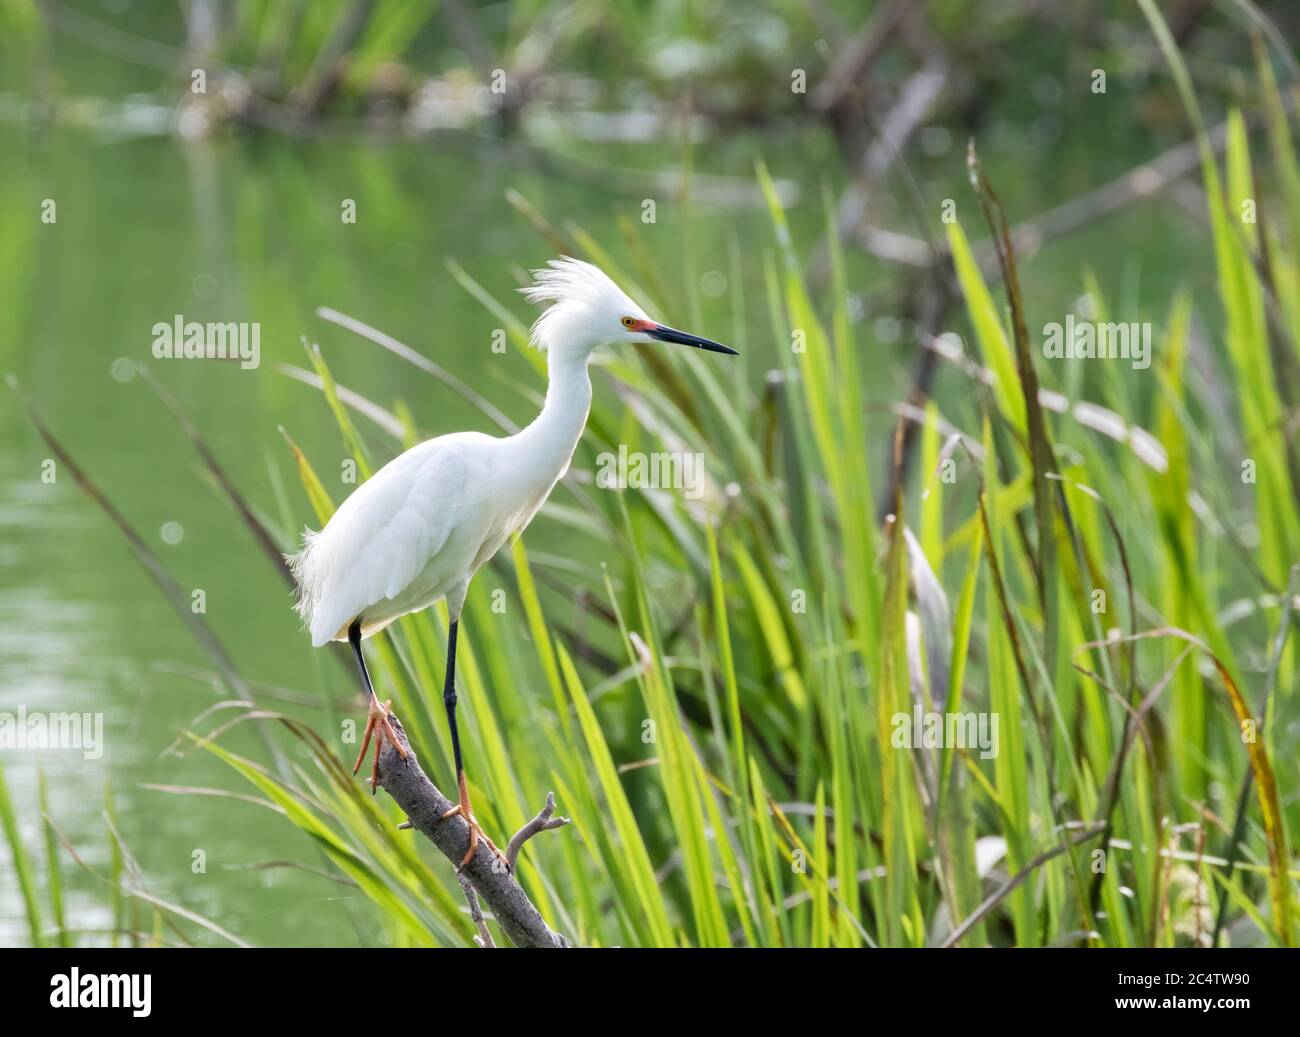 The snowy egret perched an the branch and fishing at Smith Oak Wildlife sanctuary, Texas Stock Photo